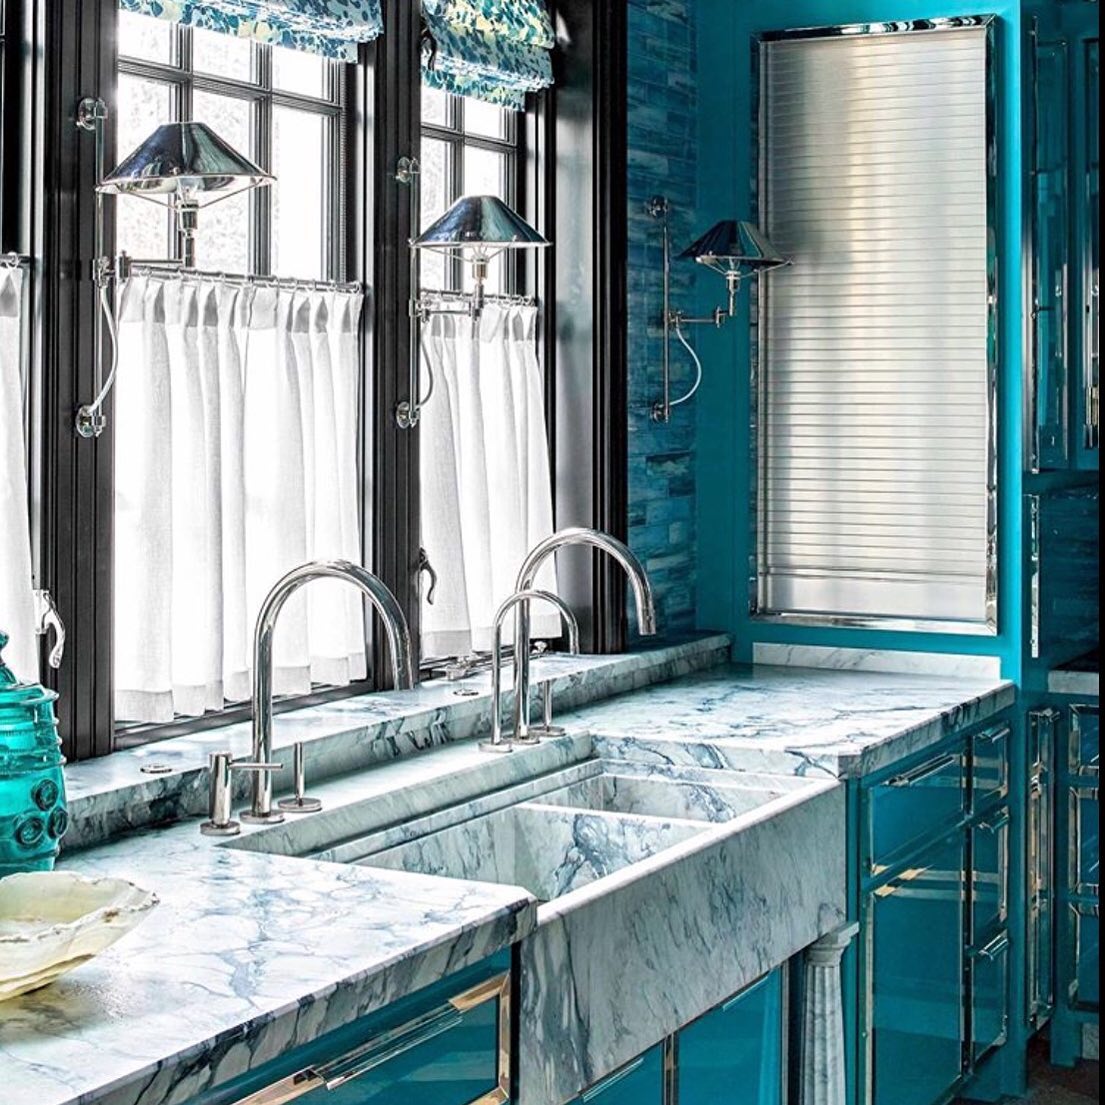 A turquoise kitchen with marble counter tops.